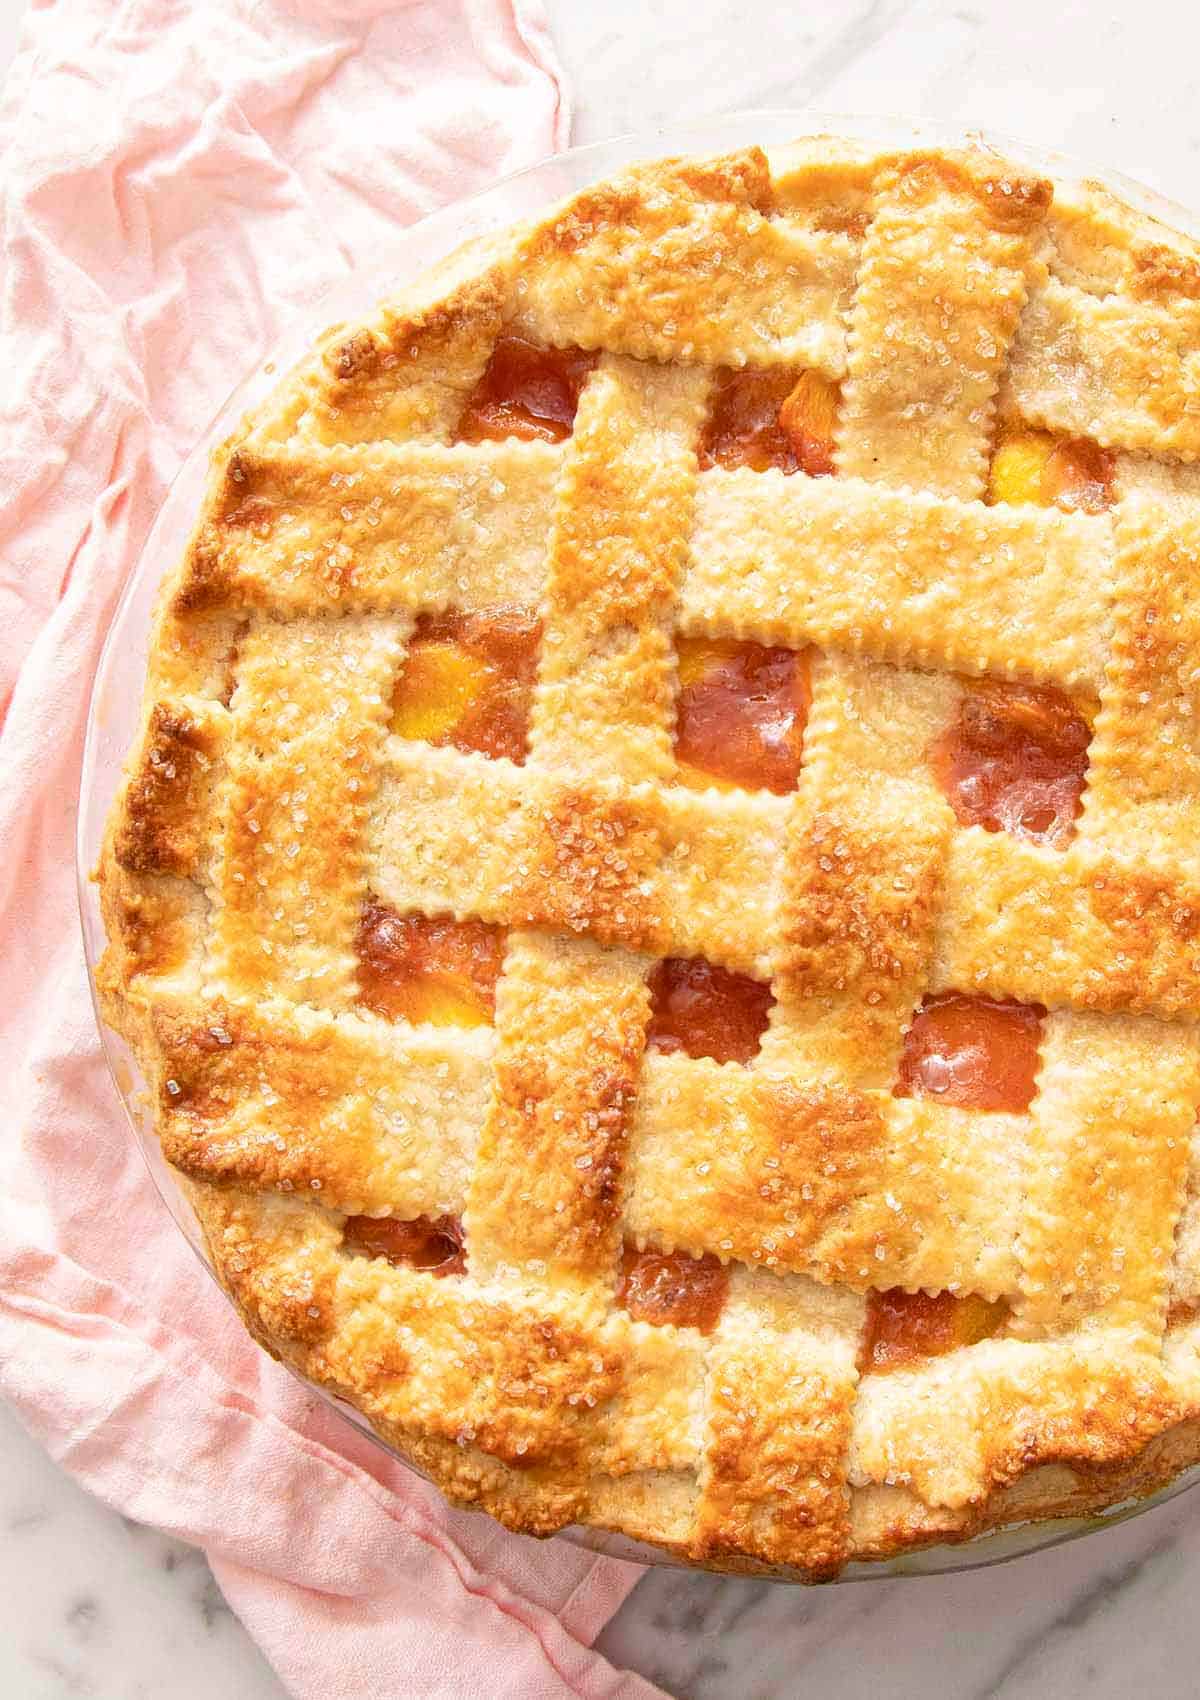 Overhead view of a baked pie with lattice crust.